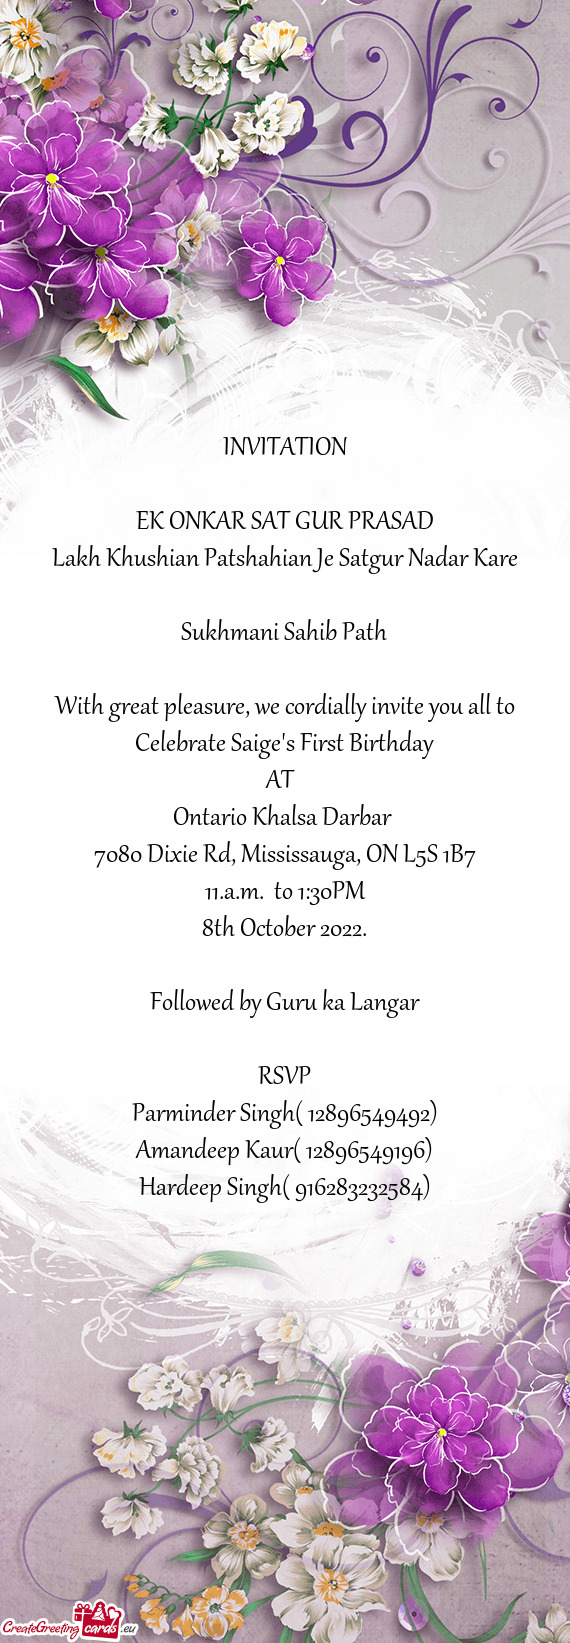 With great pleasure, we cordially invite you all to Celebrate Saige